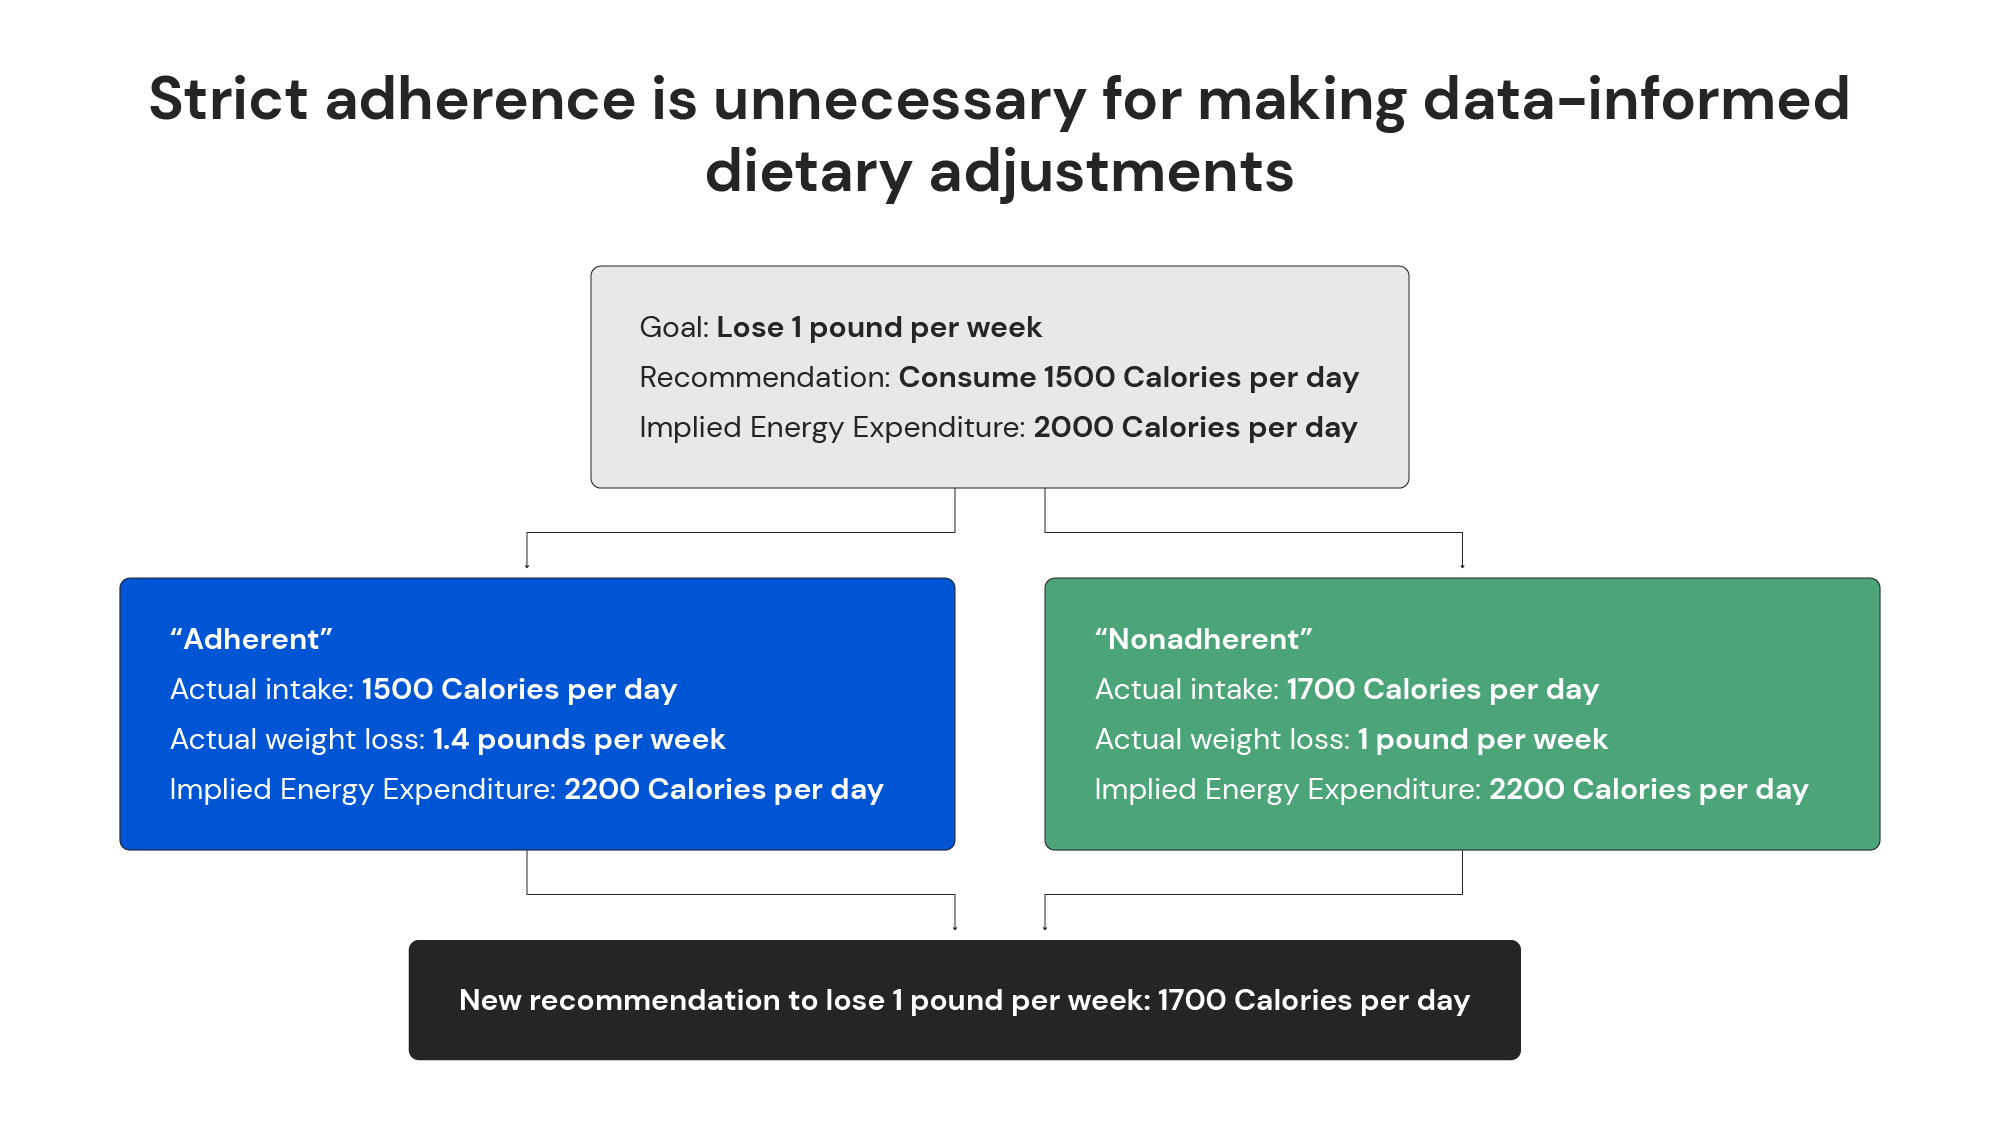 Strict adherence is unnecessary for making data-informed dietary adjustments